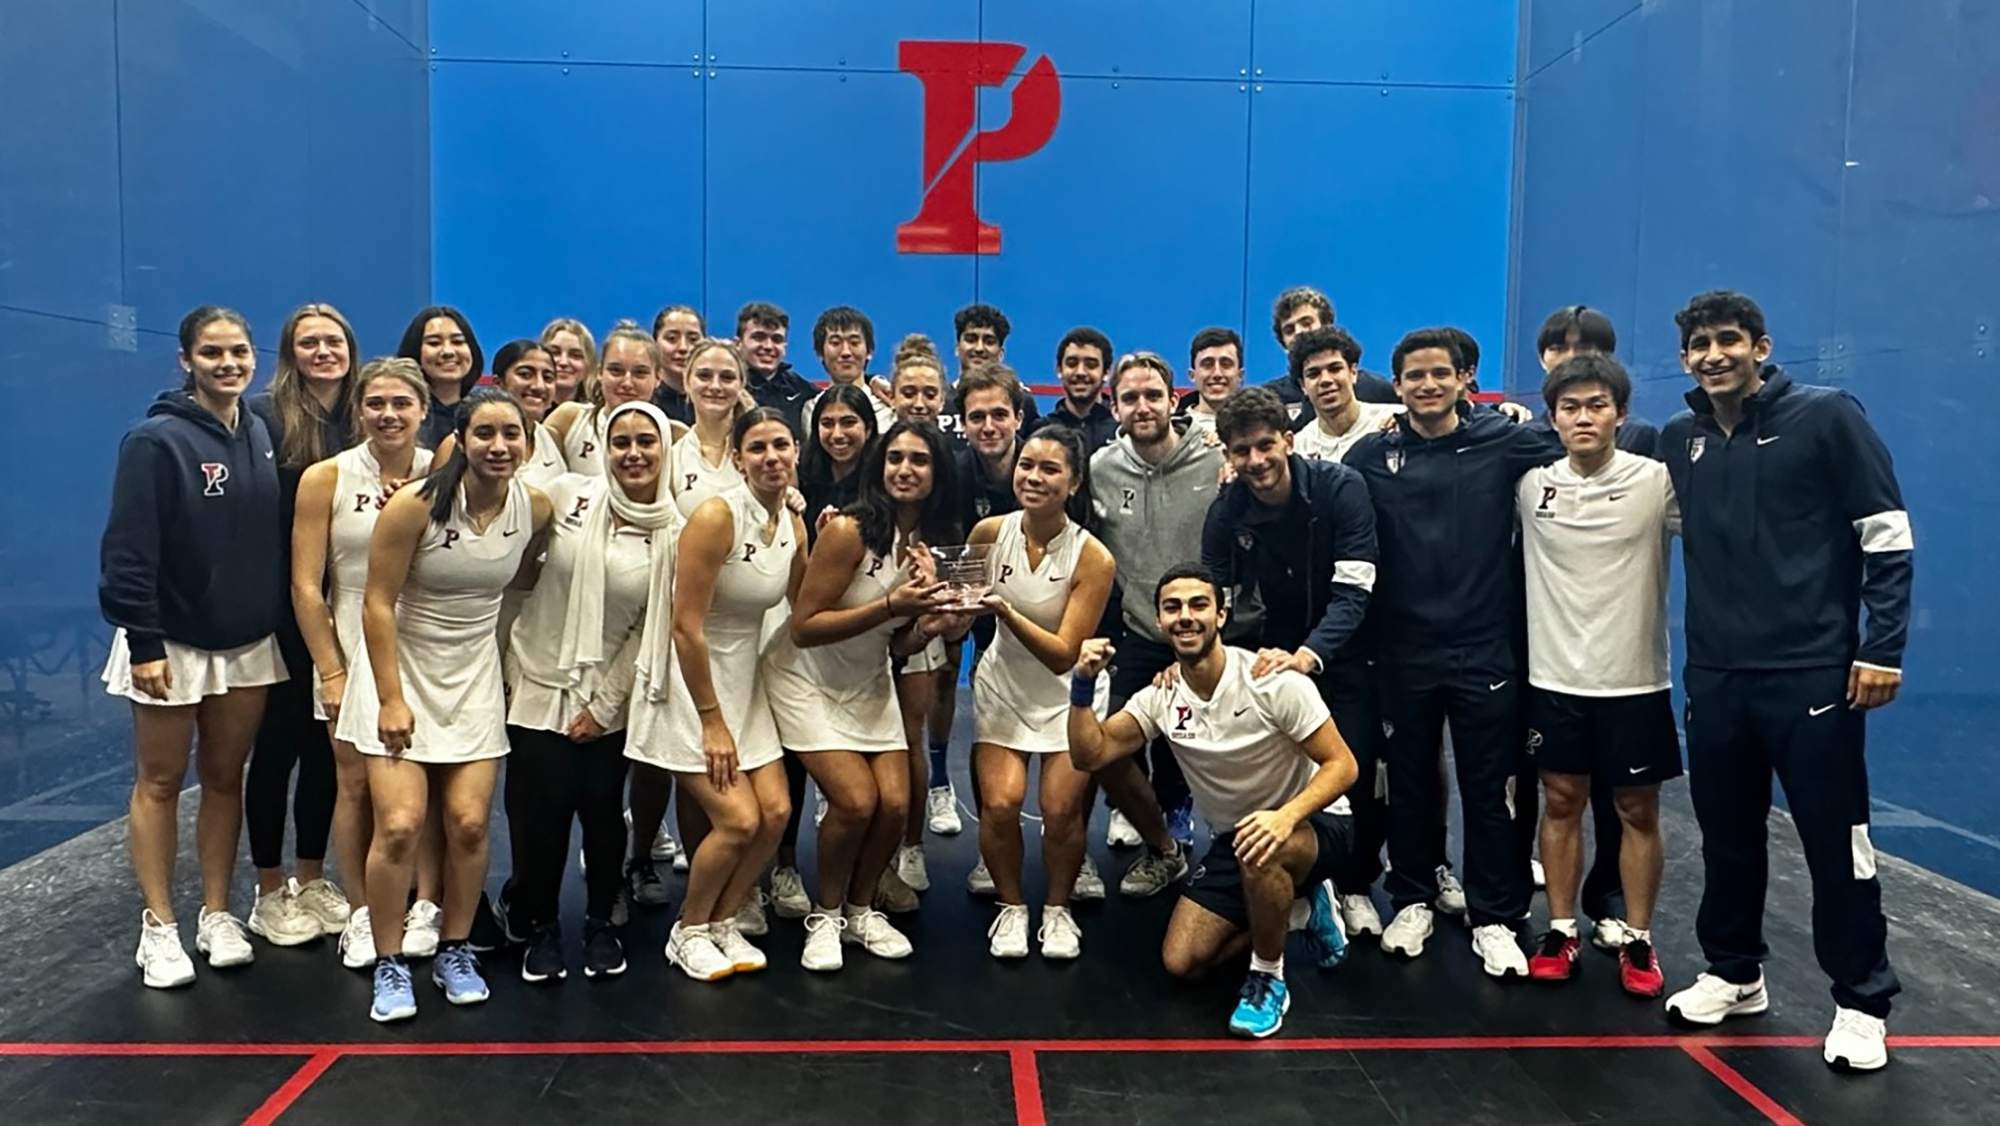 Members of the men's and women's squash teams pose on the court at the Penn Squash Center.